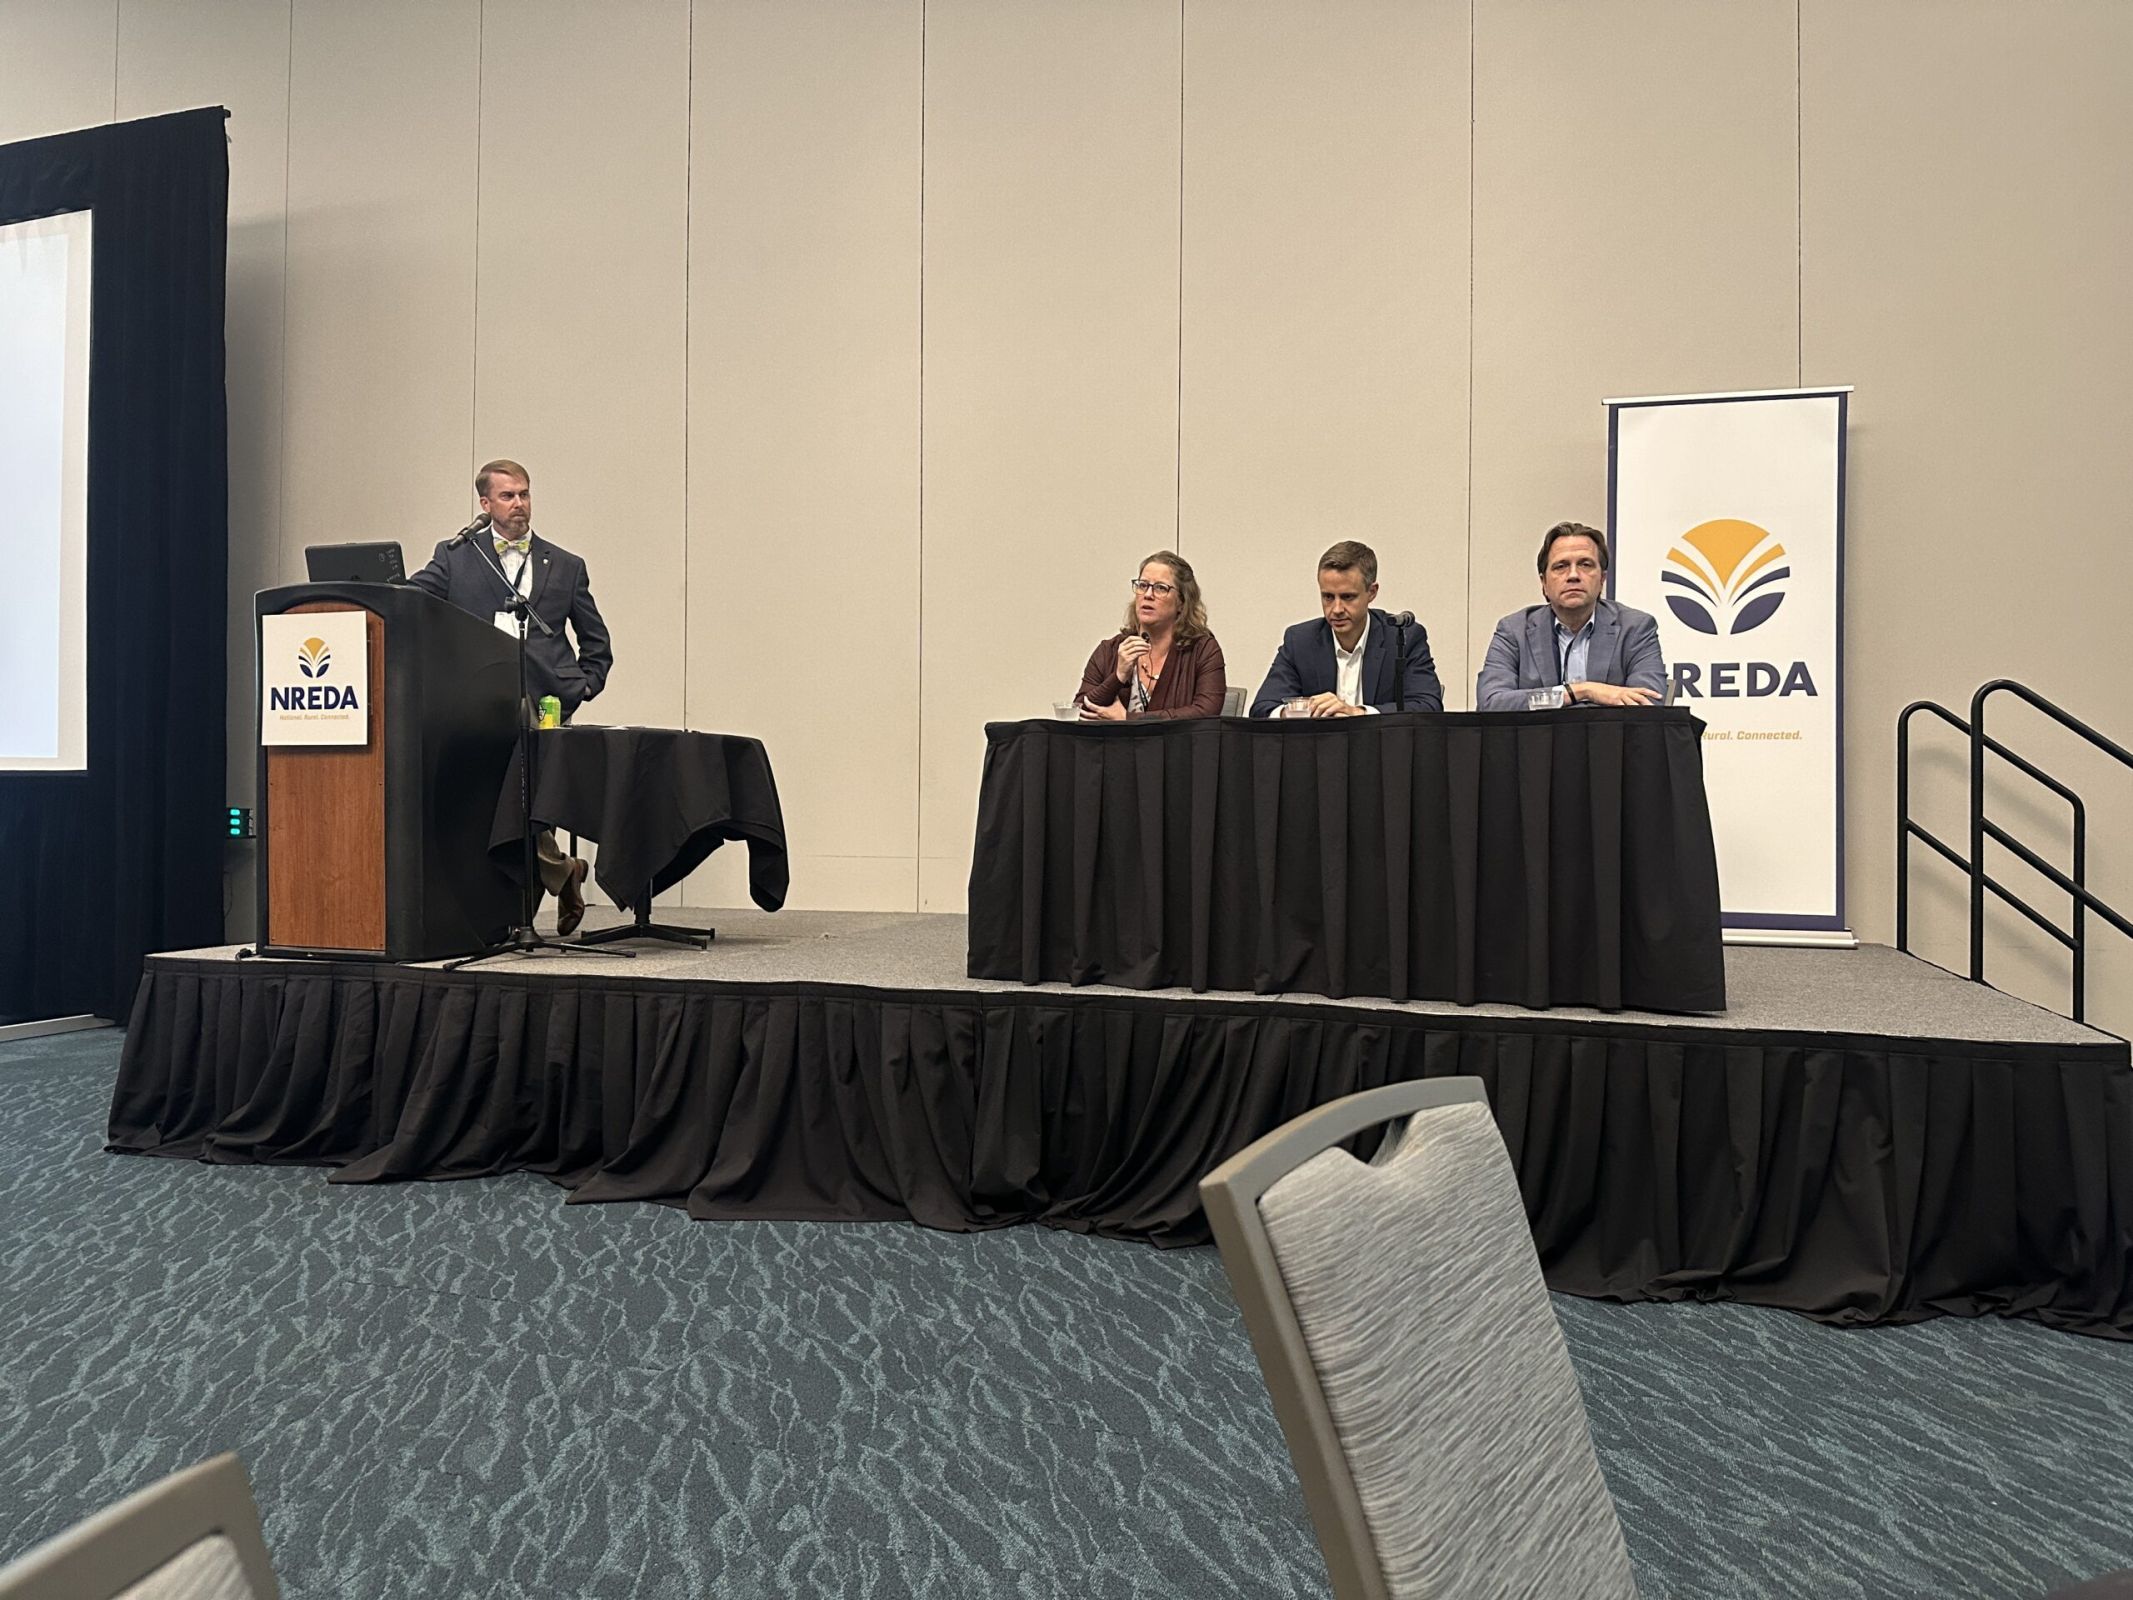 Richard Blackwell of Agracel, Inc., left, moderates a panel on site selection featuring Michaela Martin of Site Selection Group, John Longshore of Newmark Global Corporate Services, and Ford Graham of McGuireWoods Consulting.